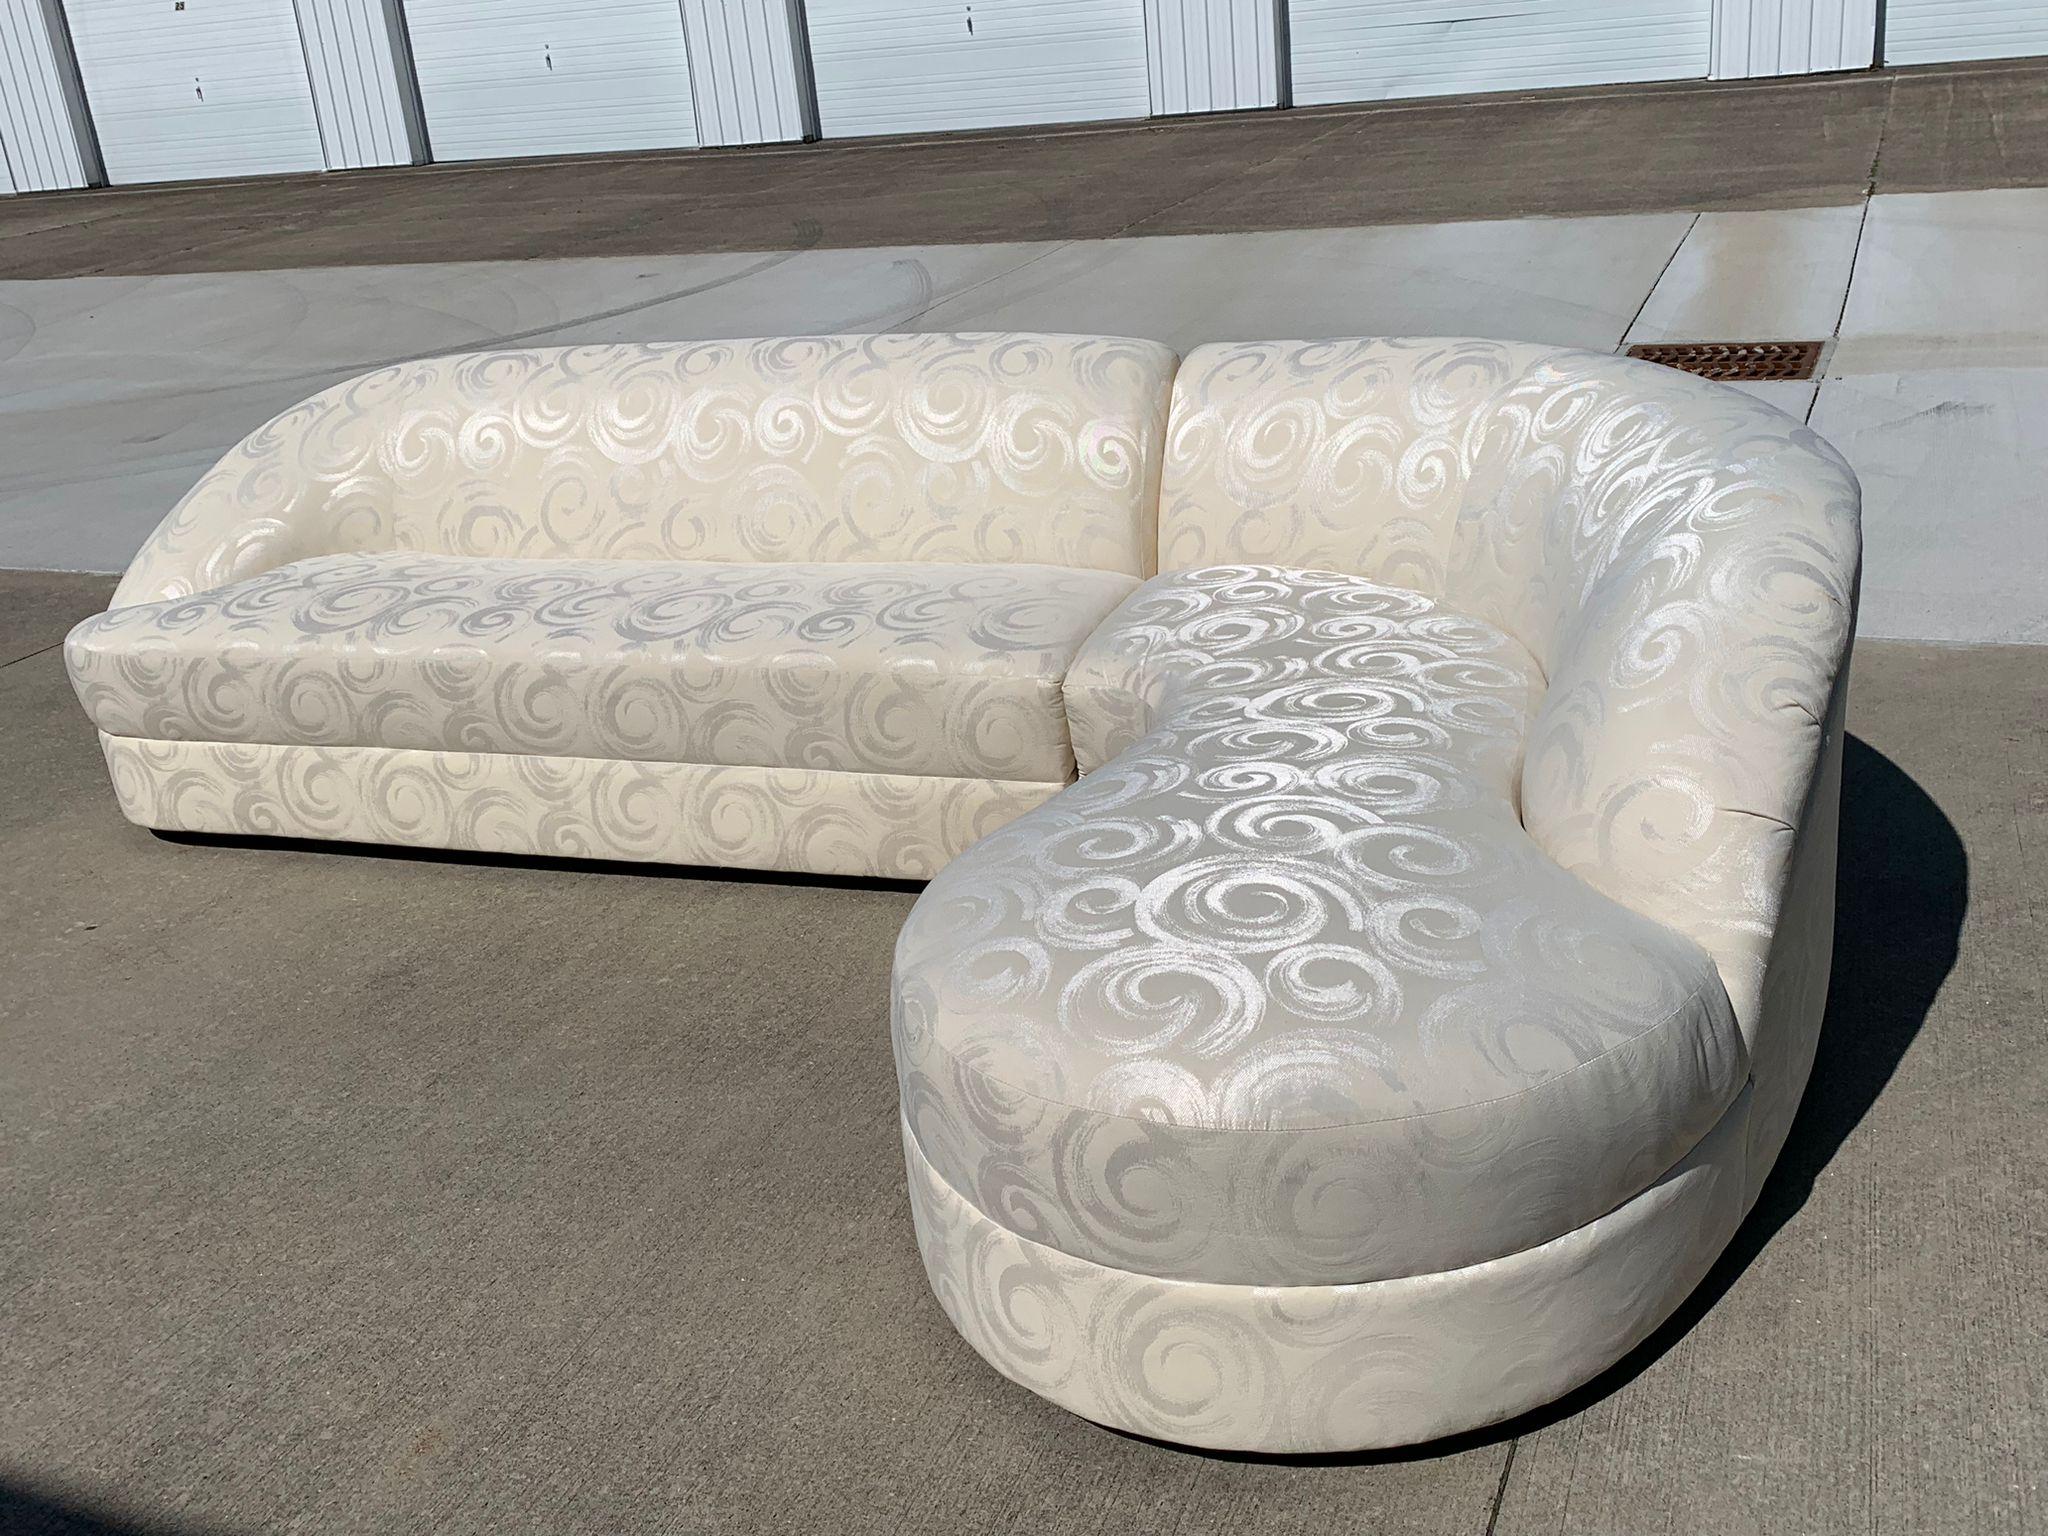 Beautiful vintage two-piece Postmodern Curved Sectional in its original unique fabric - An off-white performance fabric with a textured swirl design. In great condition but it is vintage so it won't be perfect. But who doesn't love a good curved